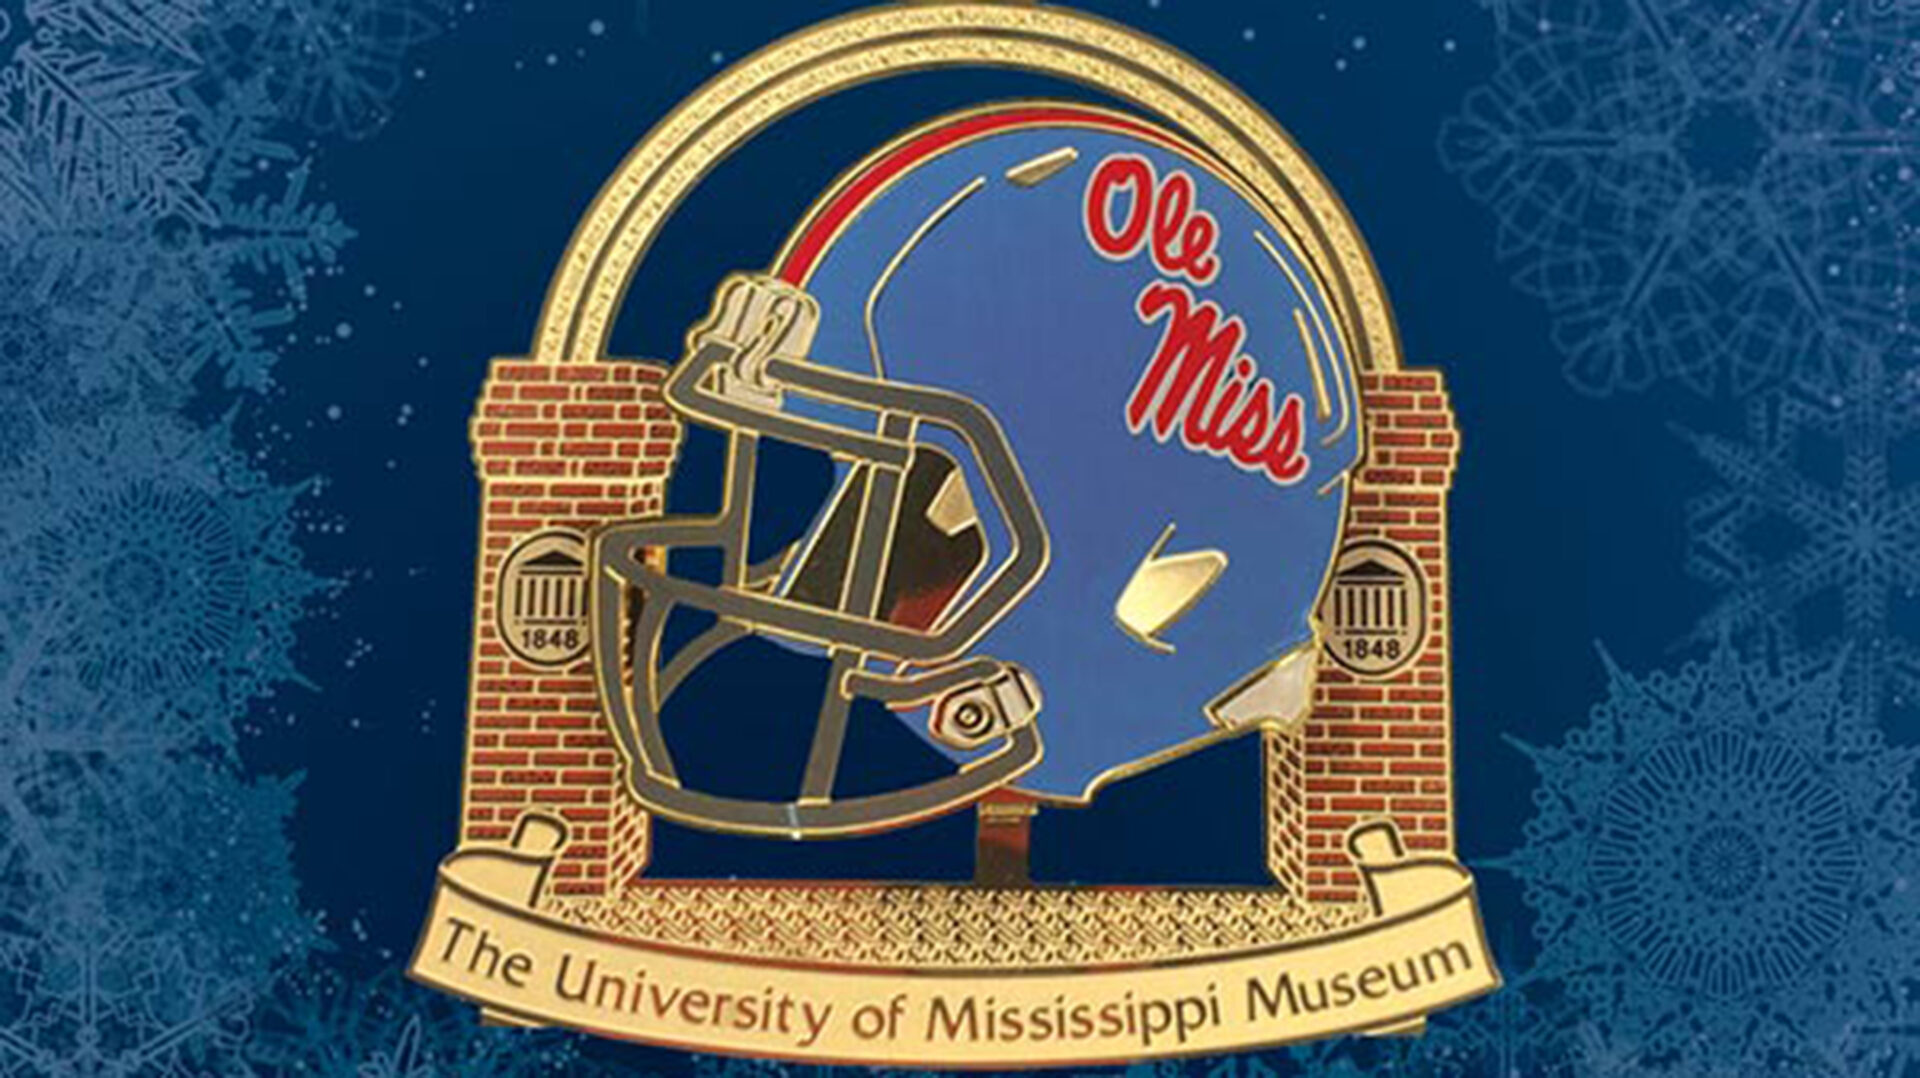 The UM Museum’s 2016 Ole Miss Powder Blue Helmet keepsake is now available for purchase. Submitted Photo